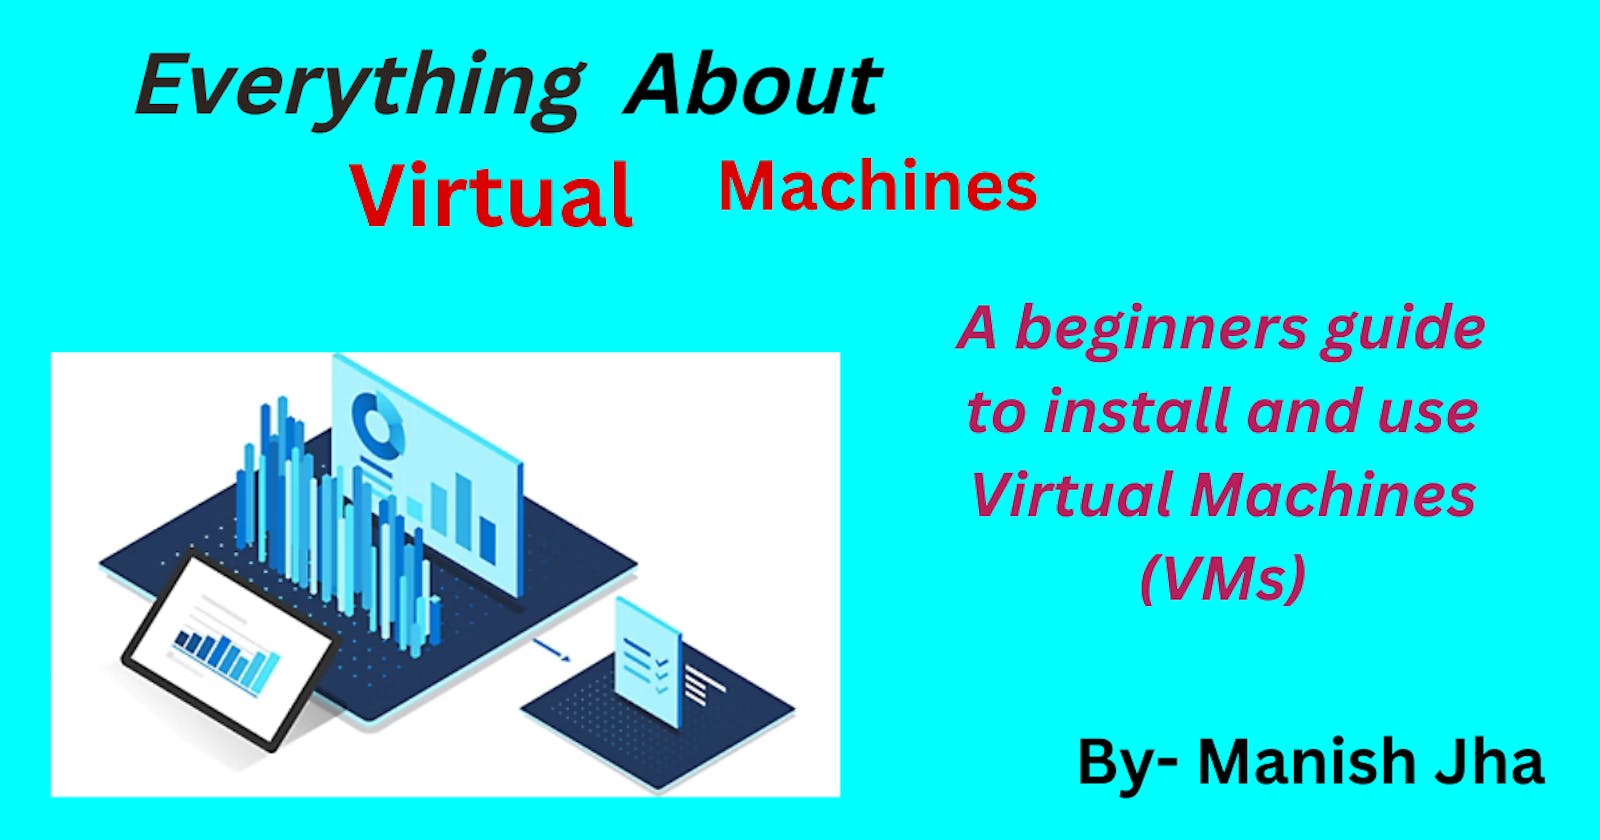 How to install and run a Virtual Machine on your local machine (pc/laptop).